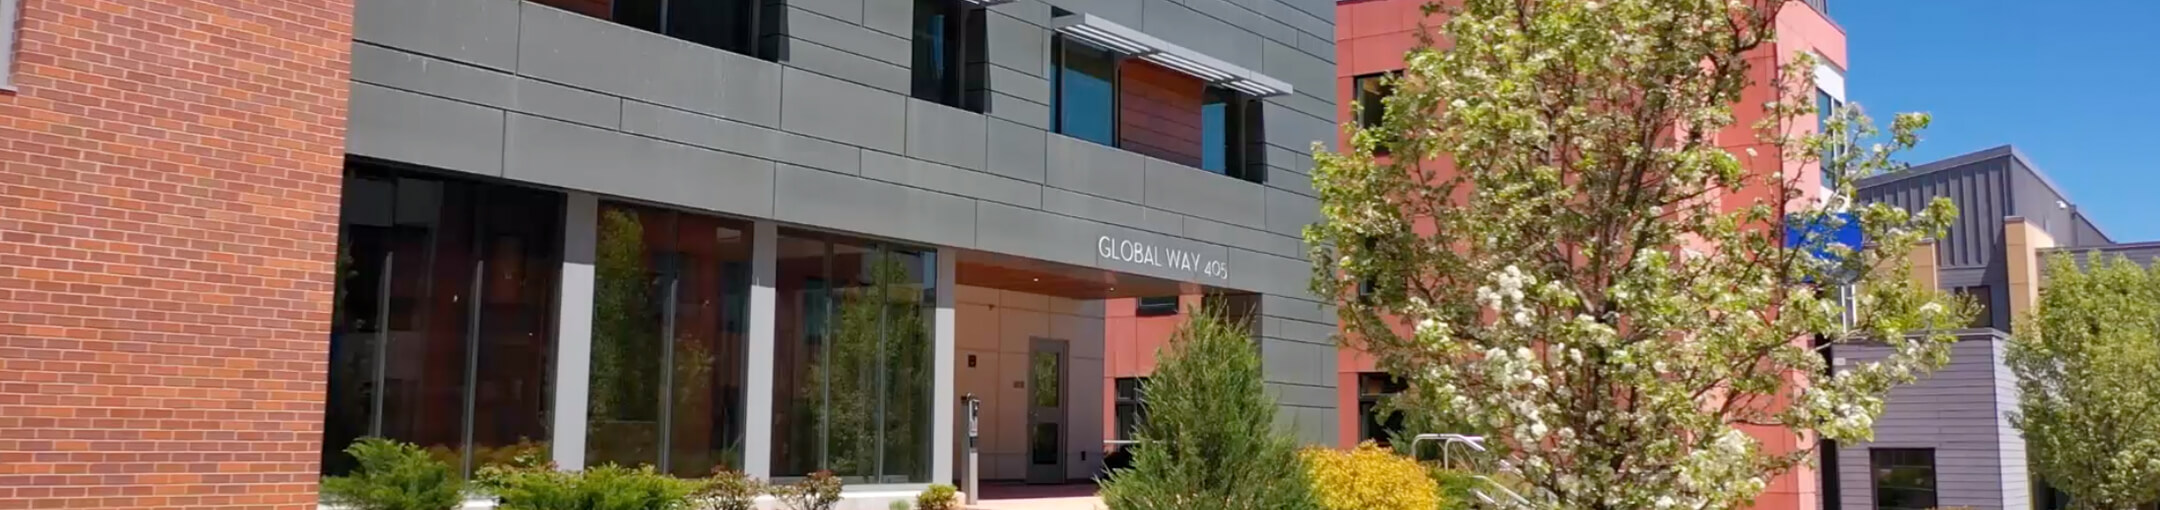 Global Village on-campus apartments at RIT